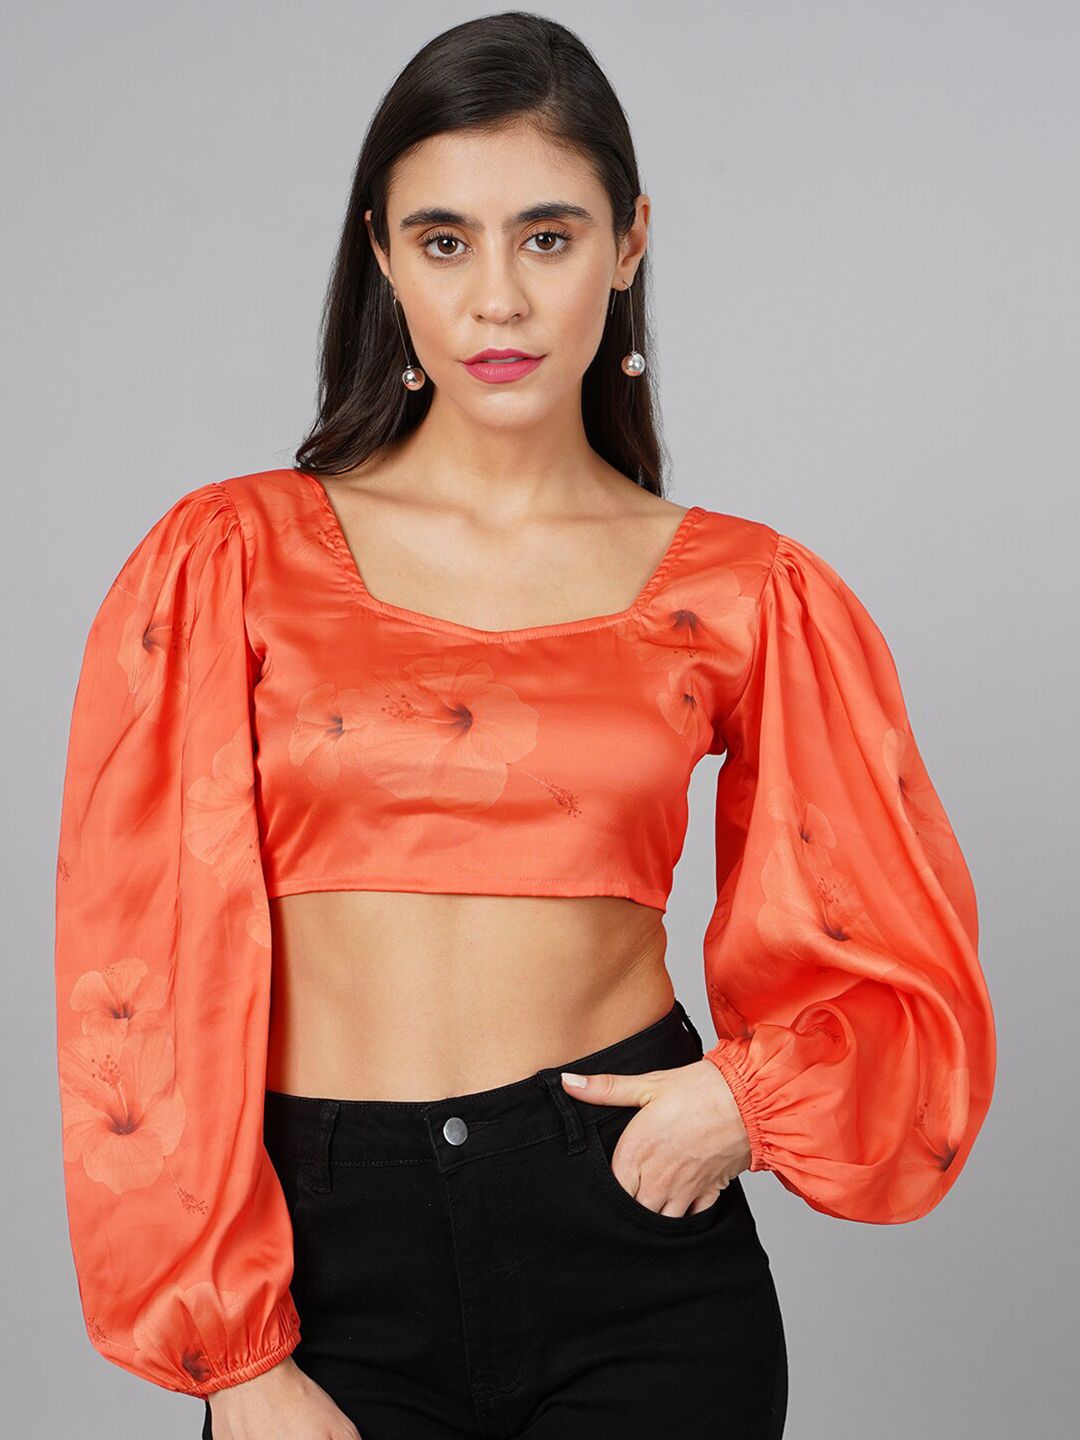 Cation Floral Print Satin Styled Back Crop Top Price in India